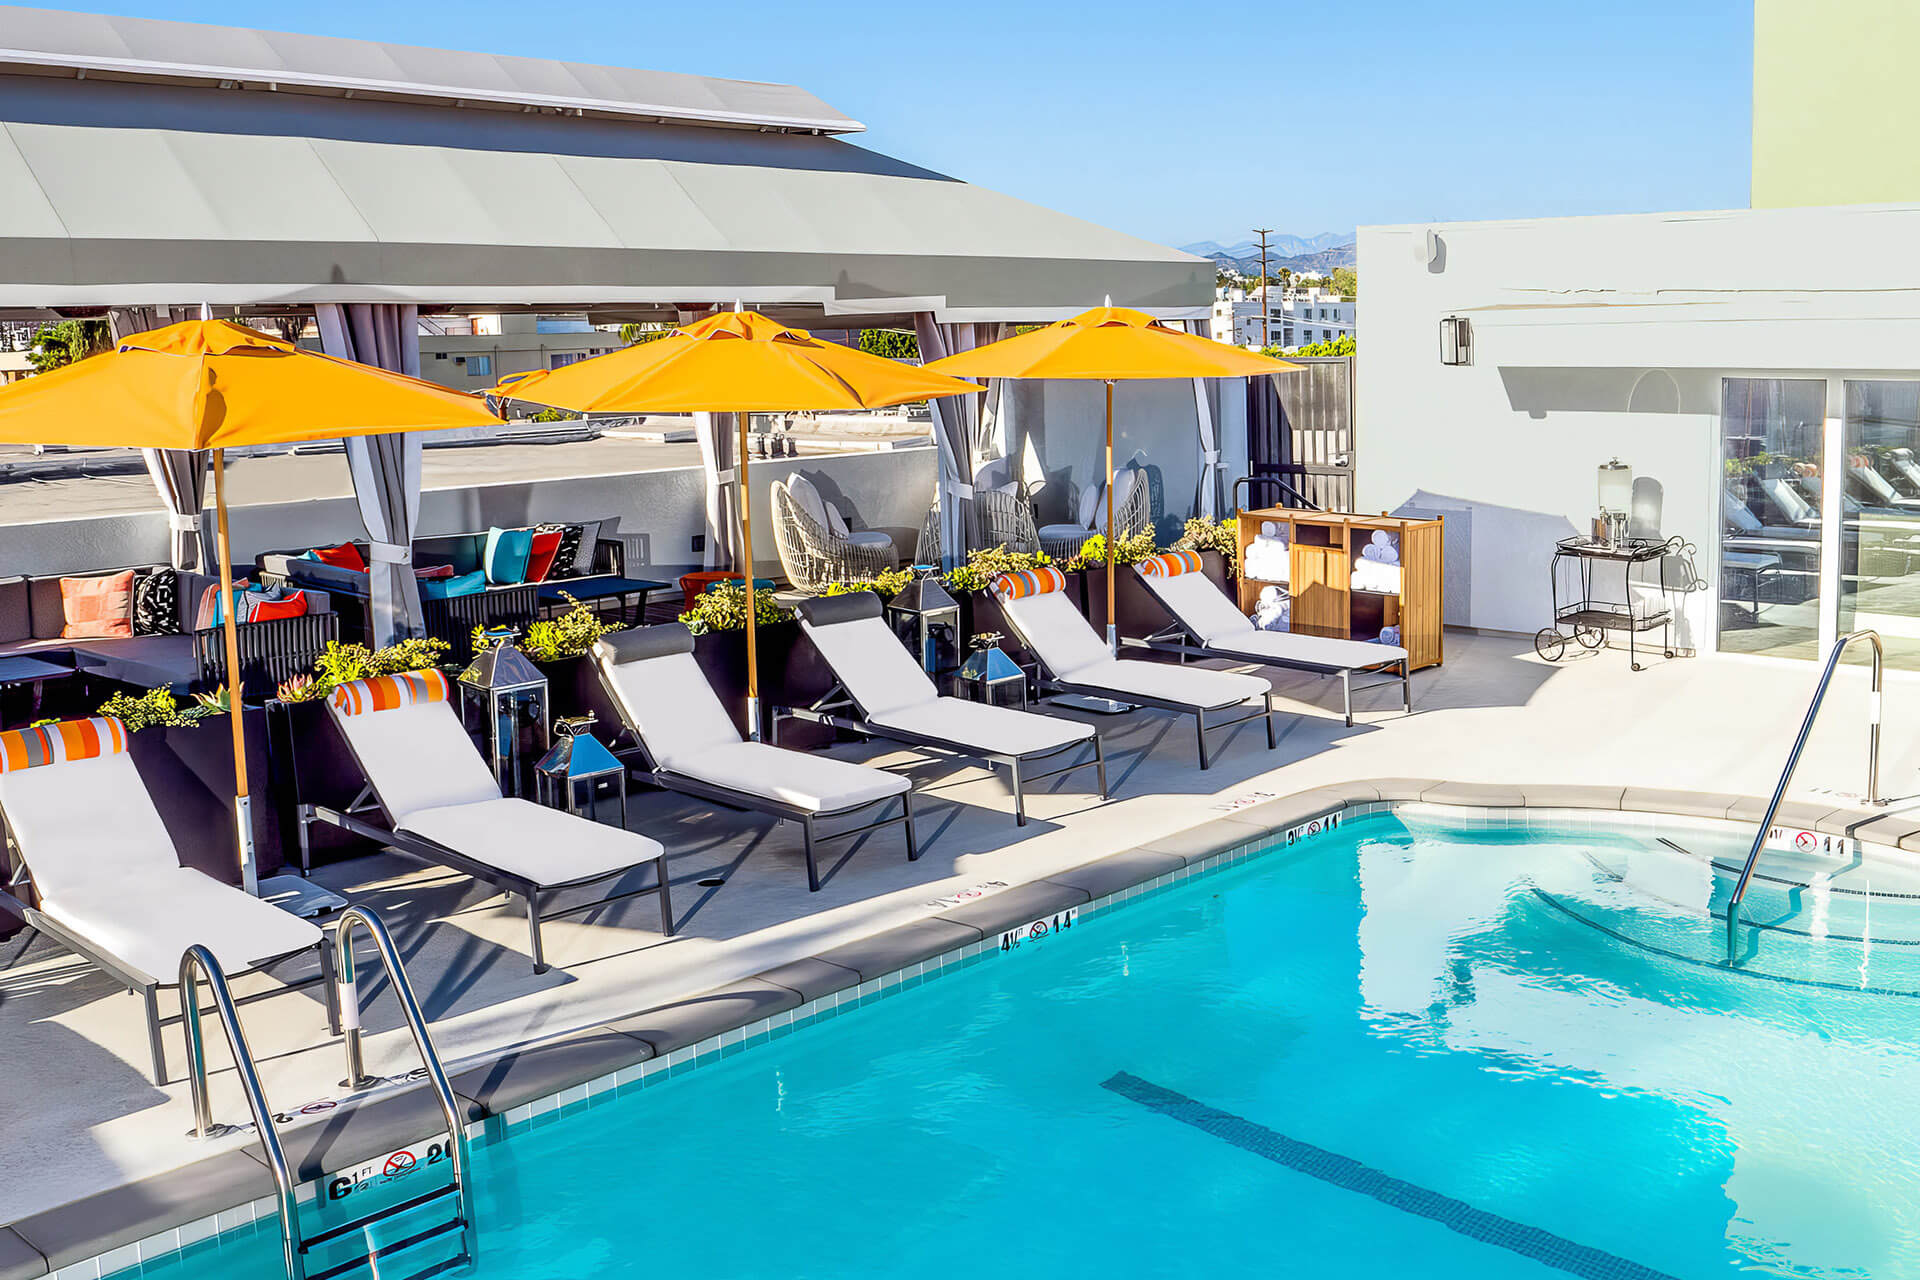 Rooftop swimming pool at Le Parc Melrose with lounge chairs and orange umbrellas, overlooking panoramic views of West Hollywood.